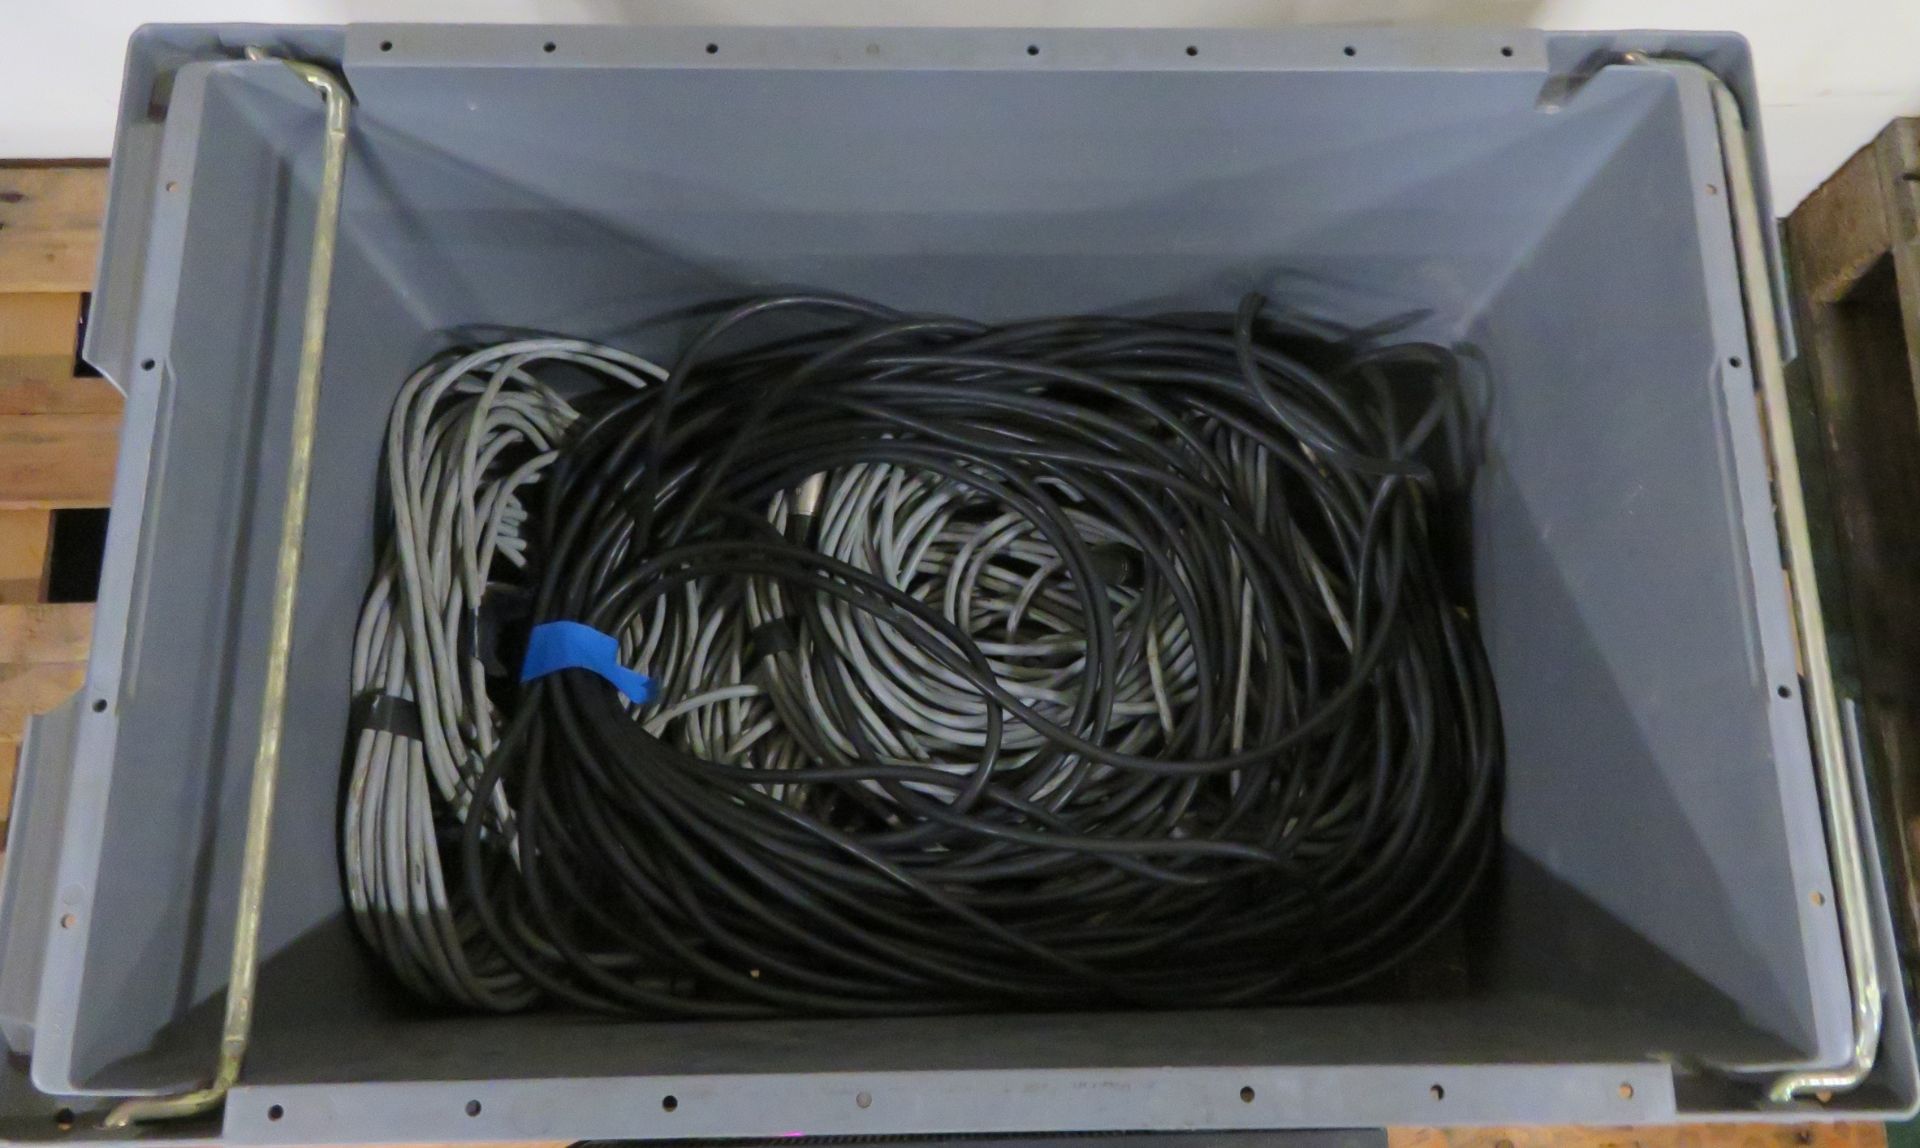 Light paint Colour Scroller x12.. Grey Crate Containing DigiDIstro Scroller Controller & Data Cable. - Image 7 of 7